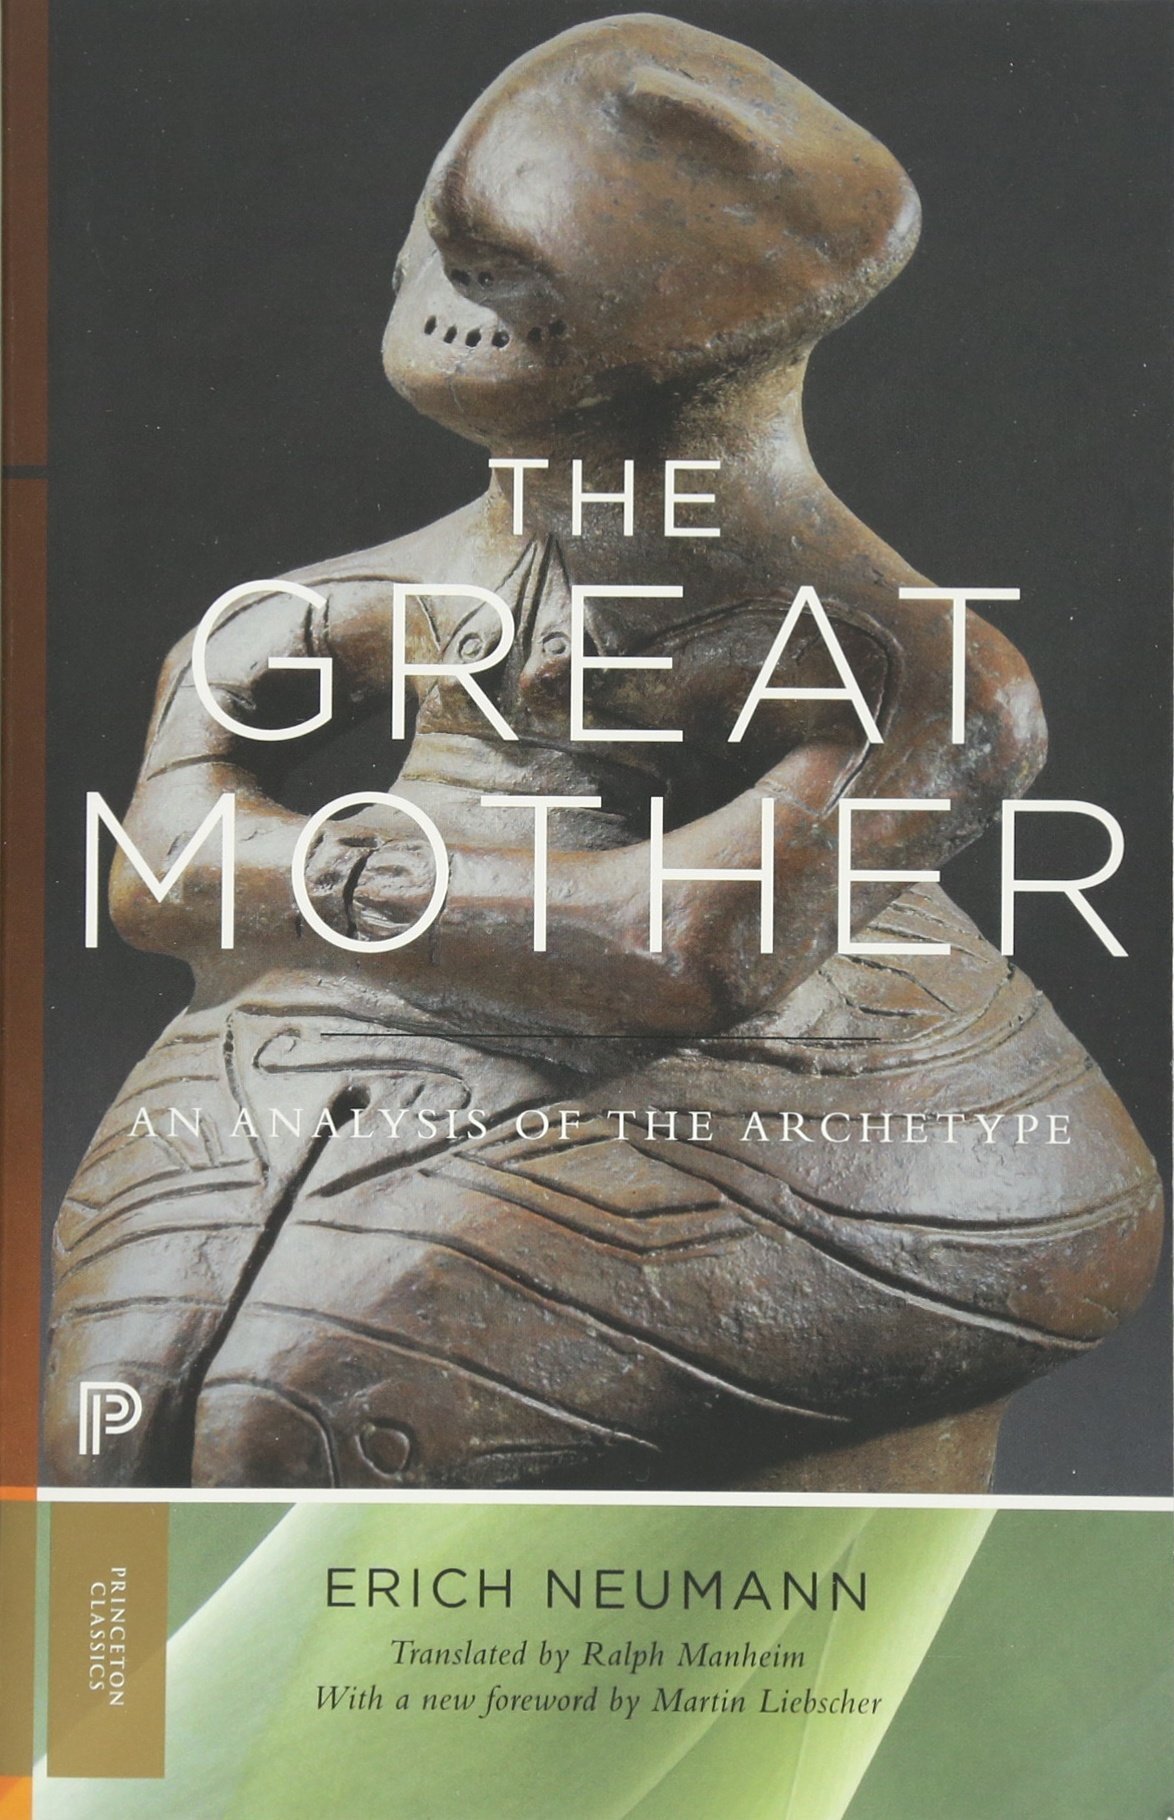 The Great Mother: An Analysis of the Archetype